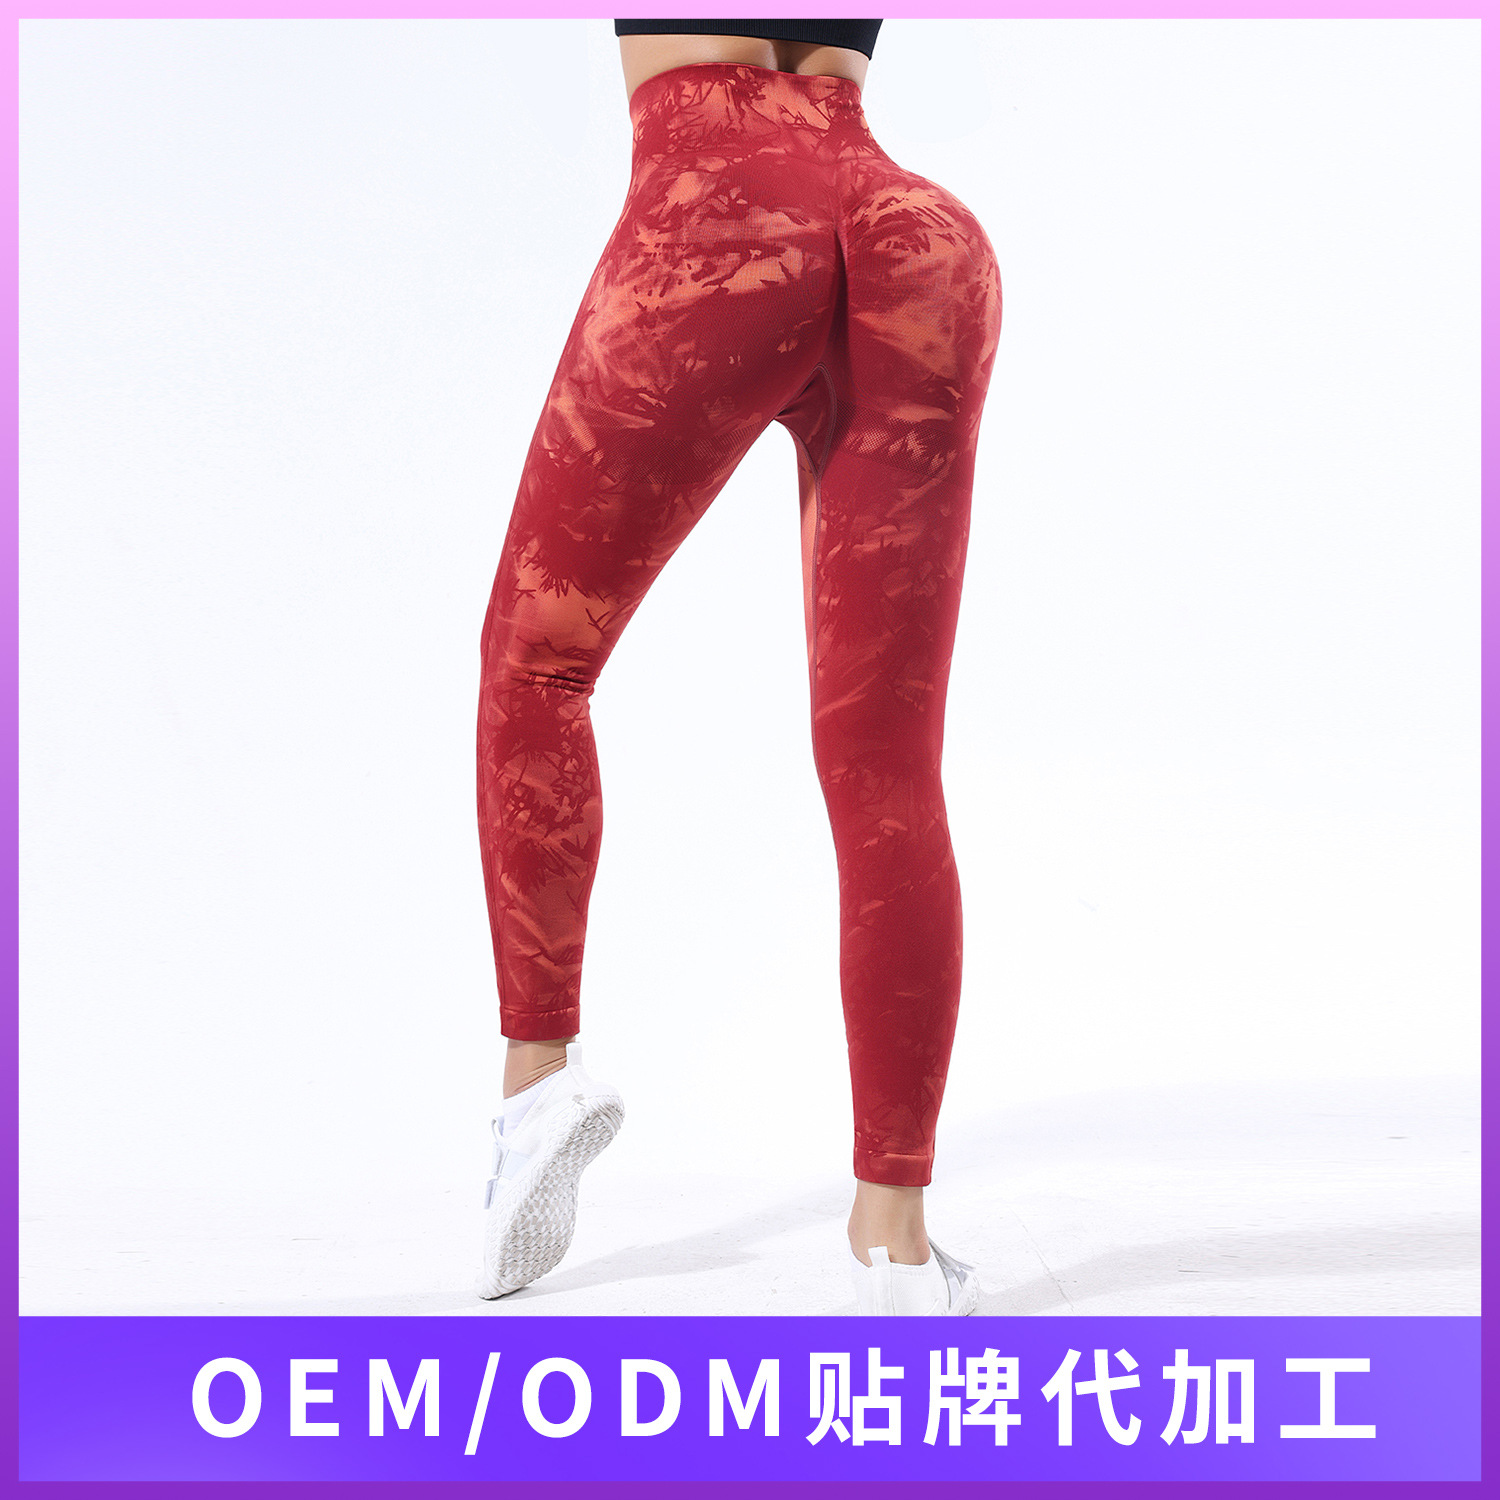 Processing Customized Quick-Dry Hip Raise High Waist Seamless Yoga Trousers Women's Tie-Dyed Printed Fitness Exercise Belly Contracting Yoga Pants